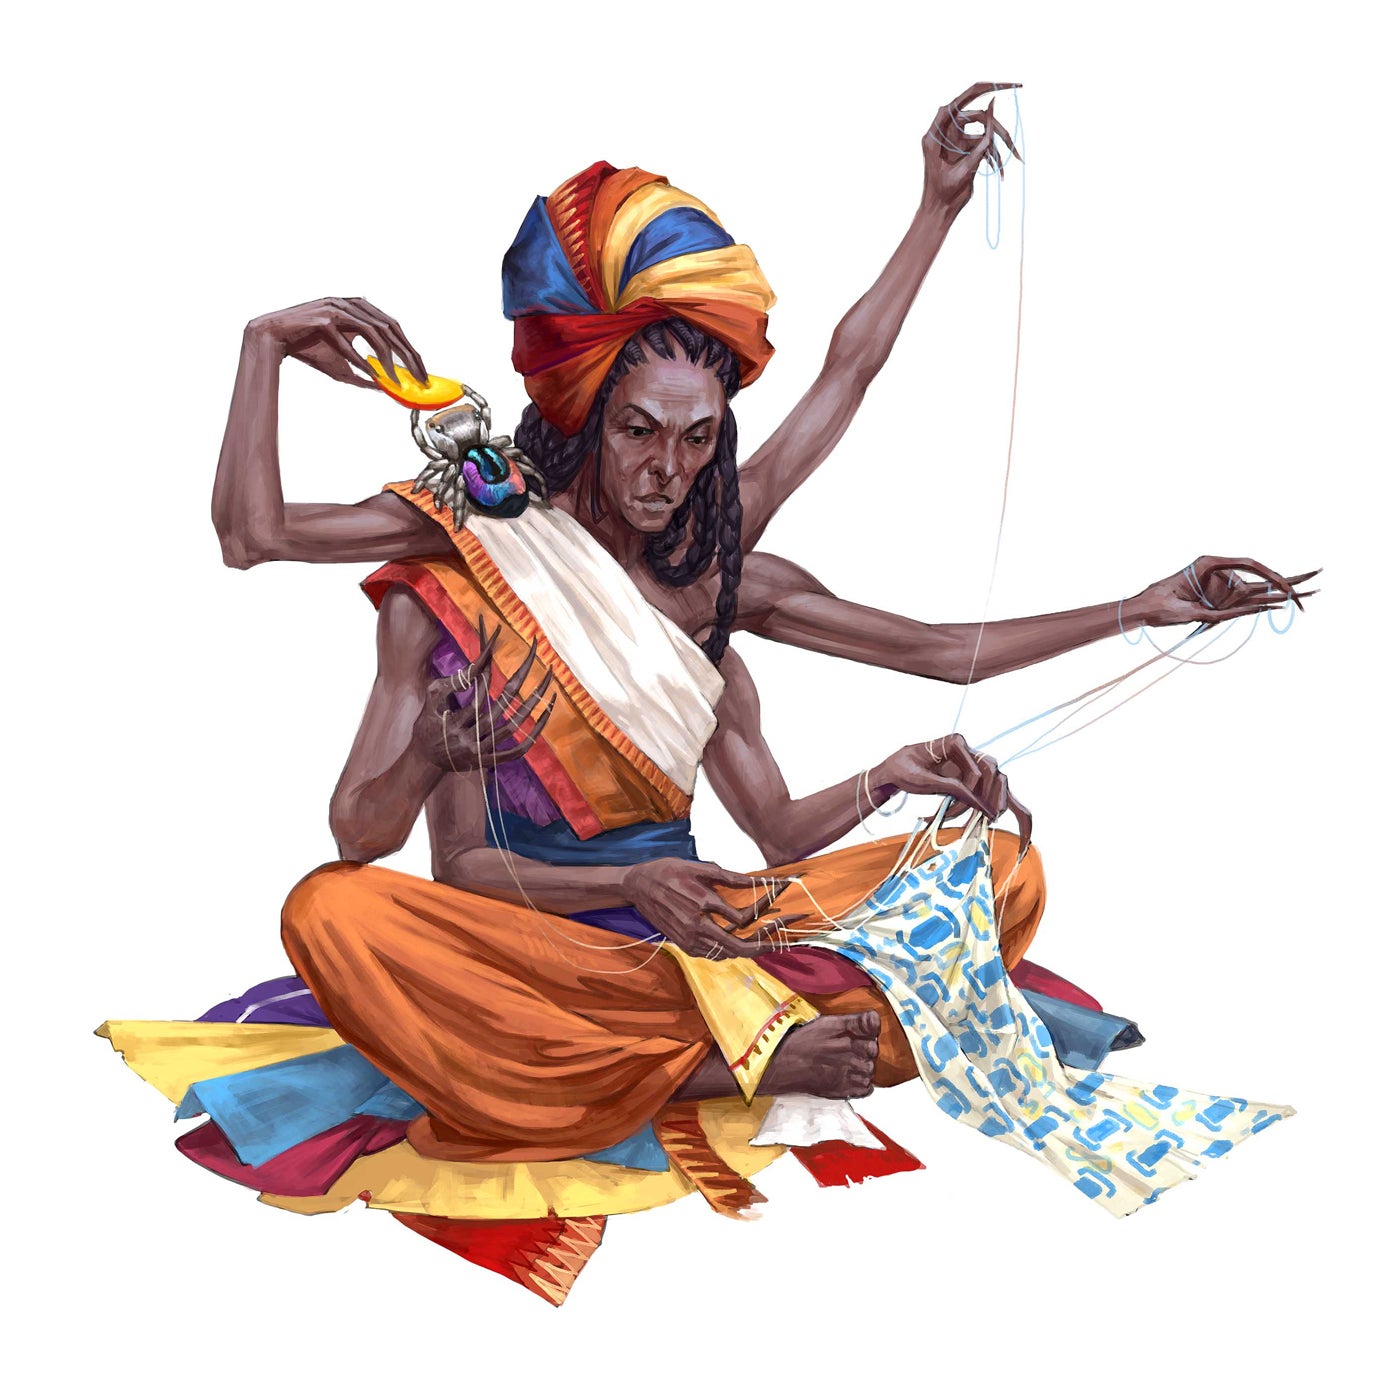 Grandmother Spider, an elderly Mwangi woman with multiple arms, sits and weaves a scarf